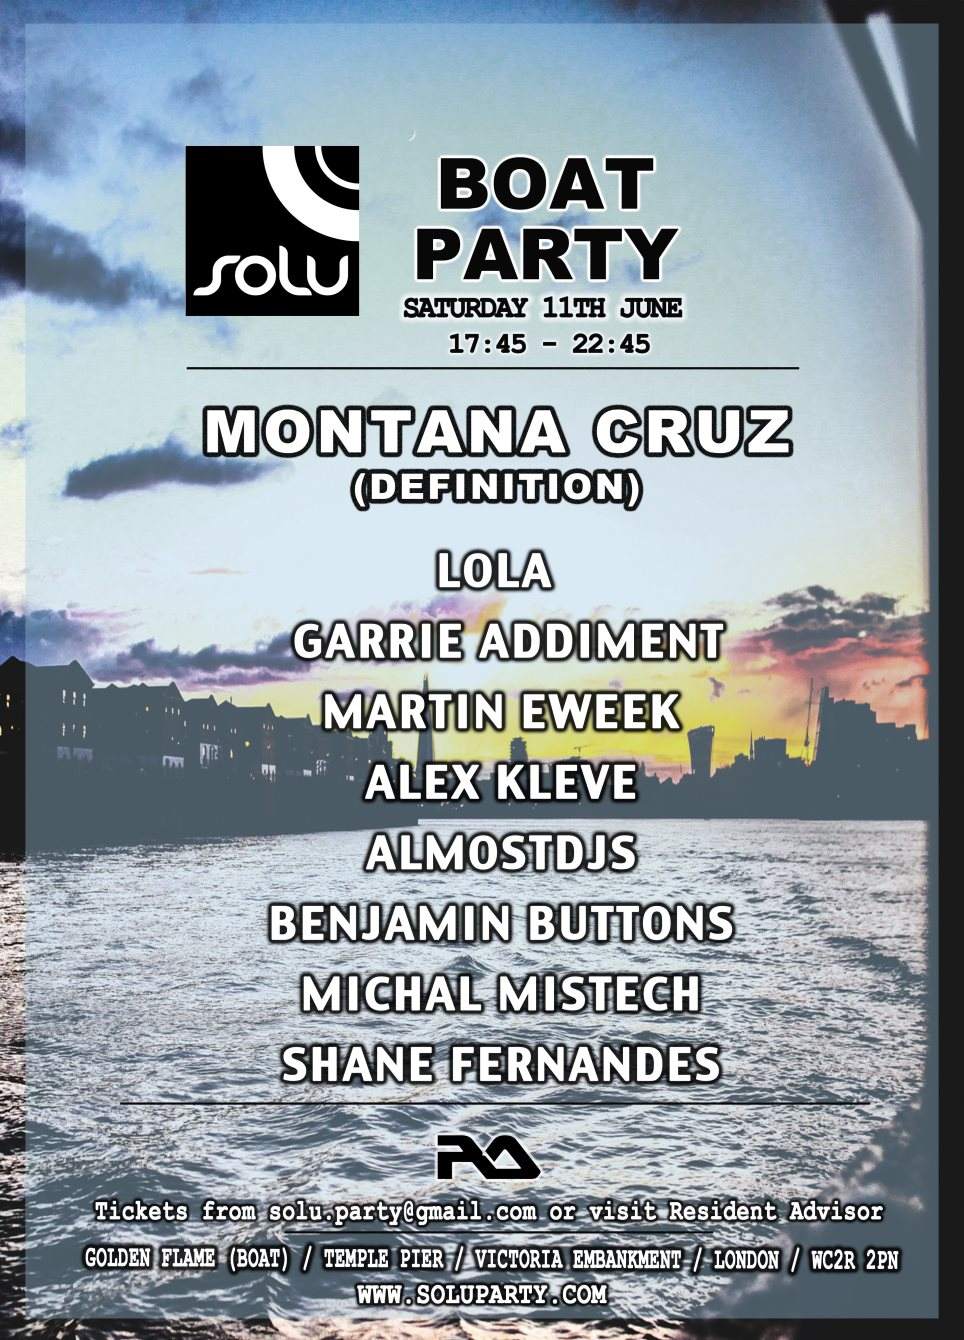 Solu Boat Party with Montana Cruz - フライヤー表